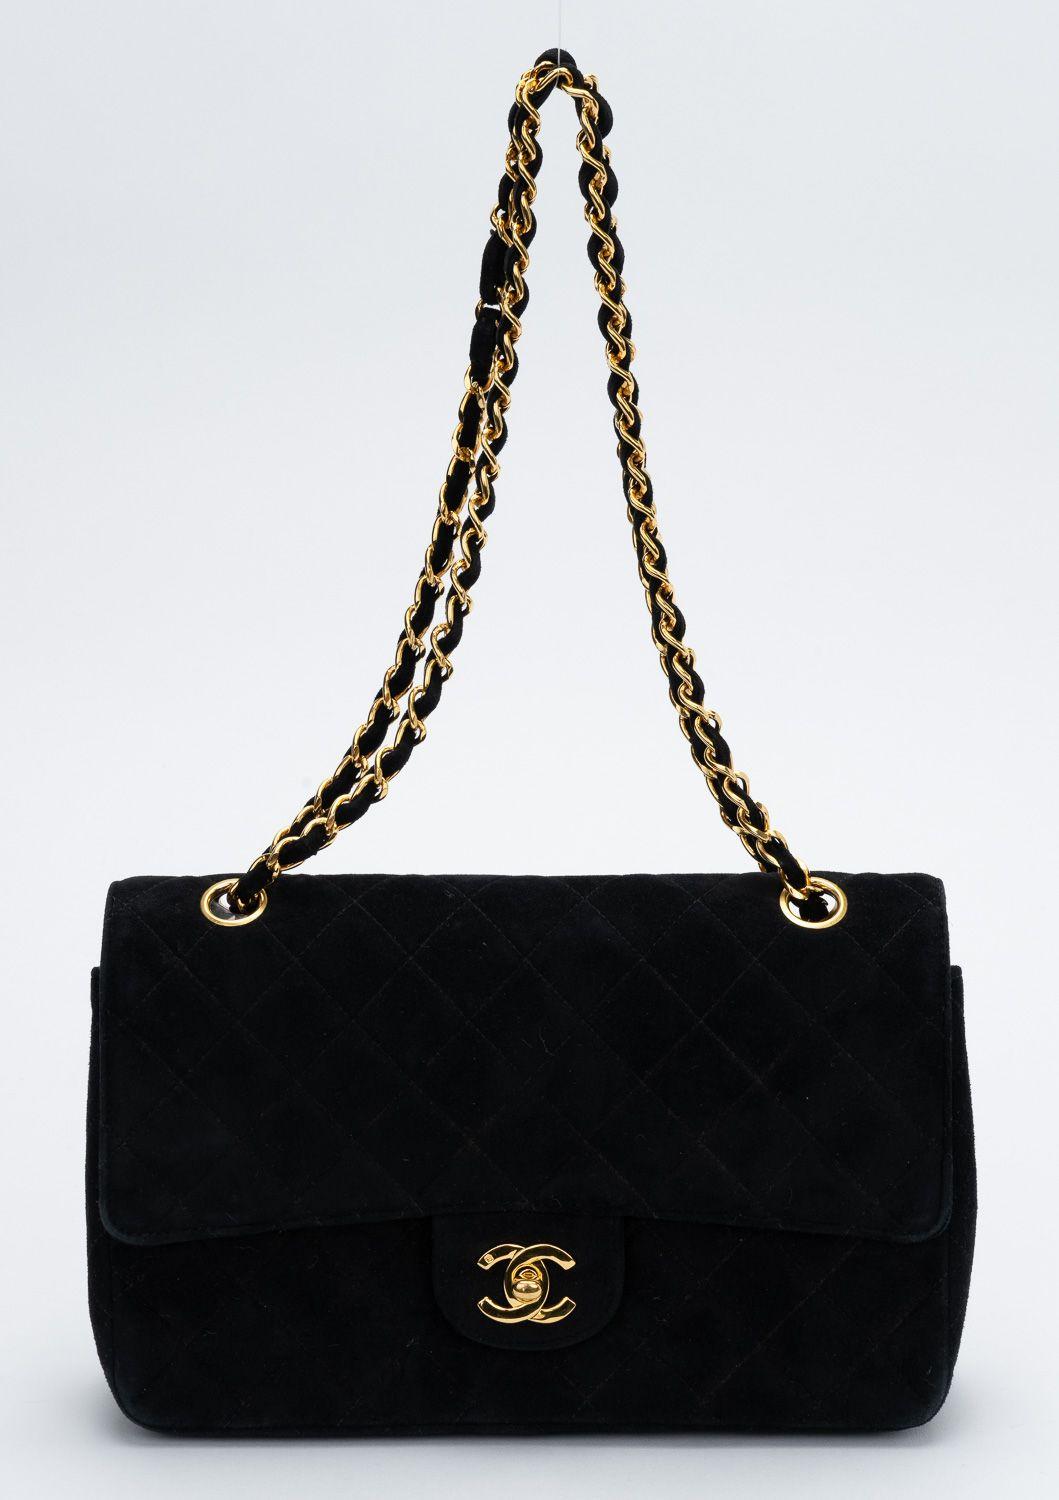 Chanel black classic suede single flap bag. Can be worn two ways: shoulder drop, 17.5